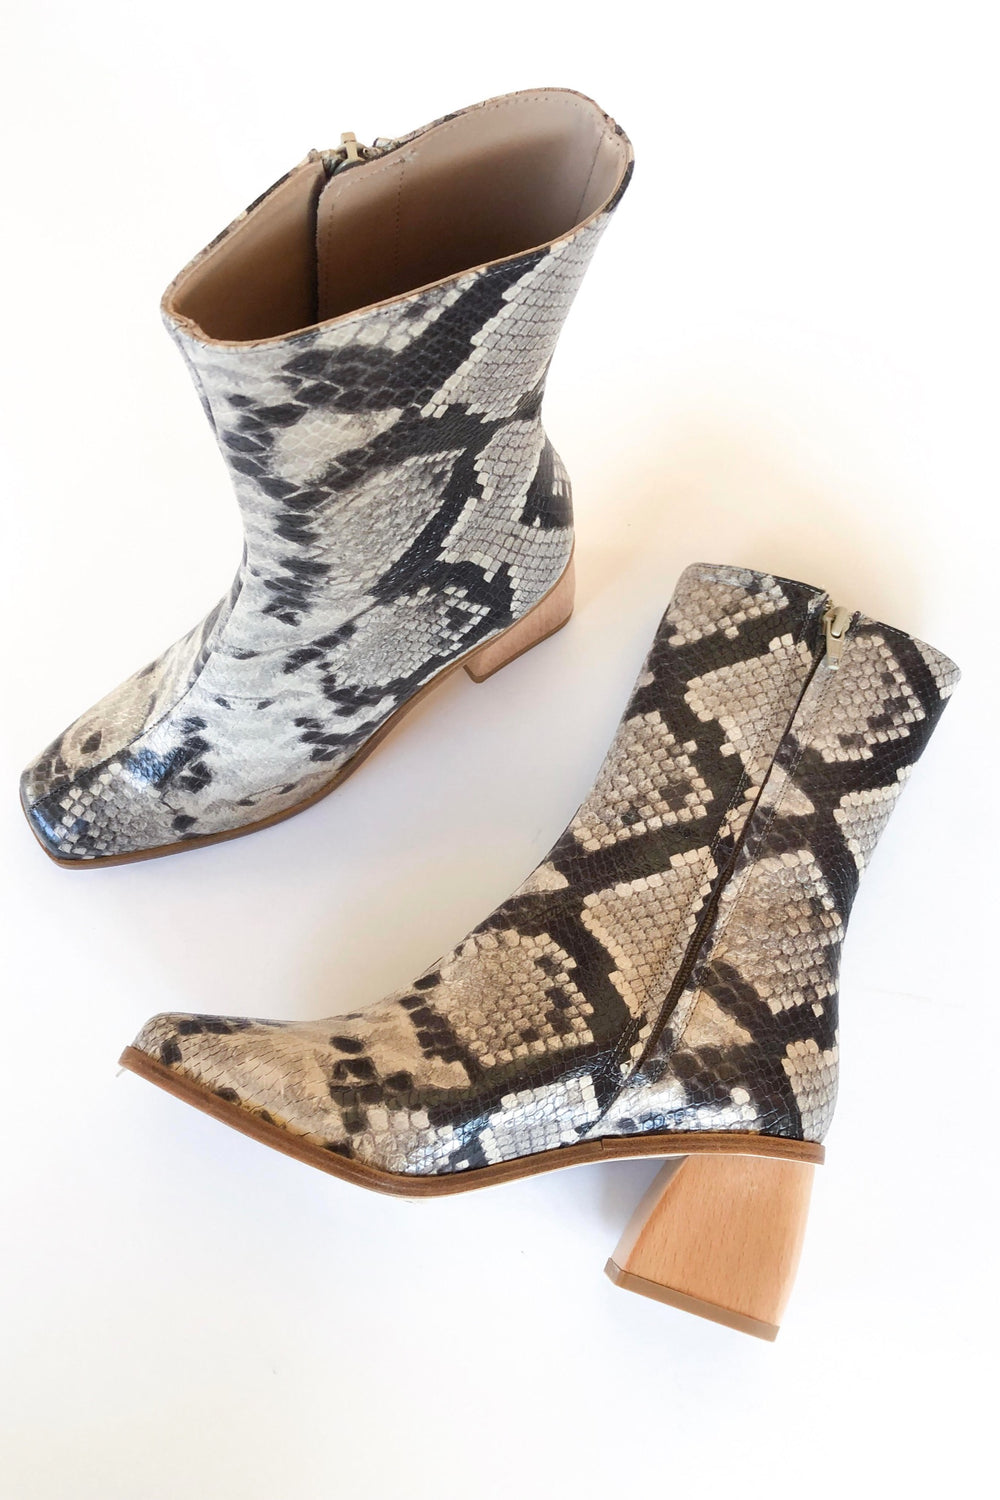 Brown Snake Emilia Boots